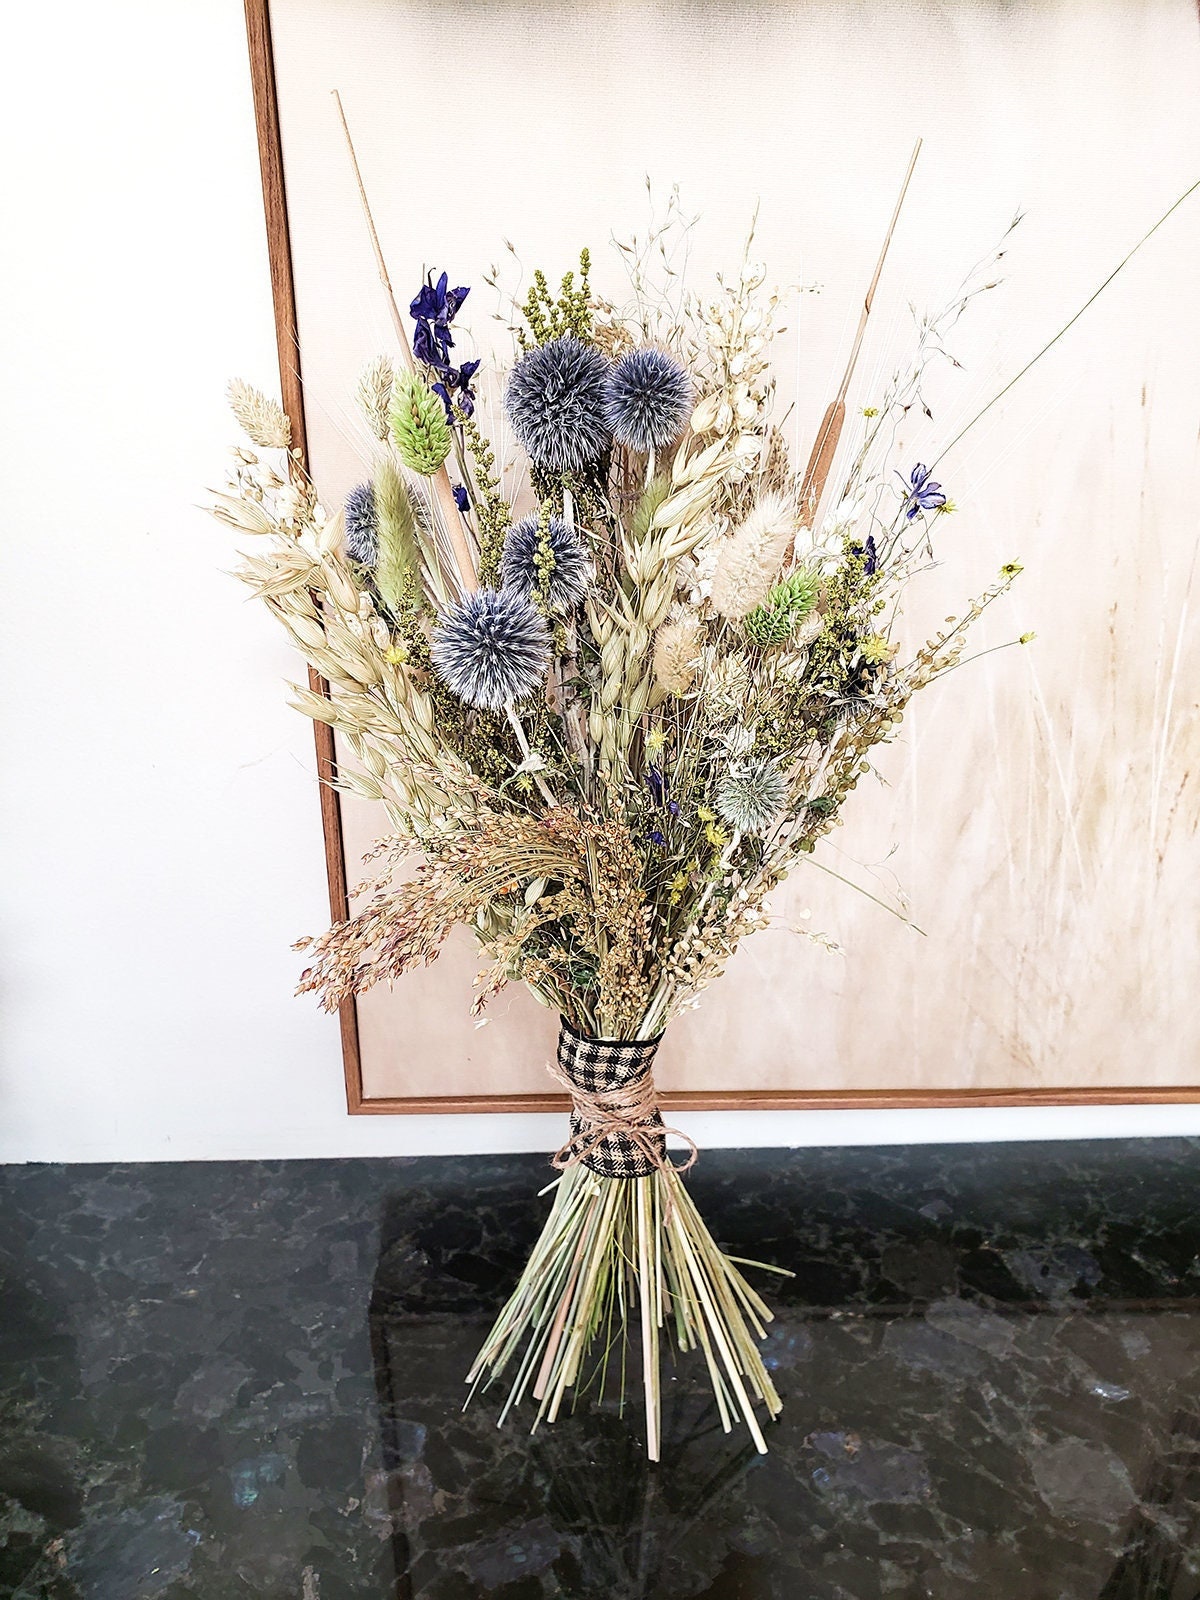 Natural Dried Flowers — Hometown Flower Co.